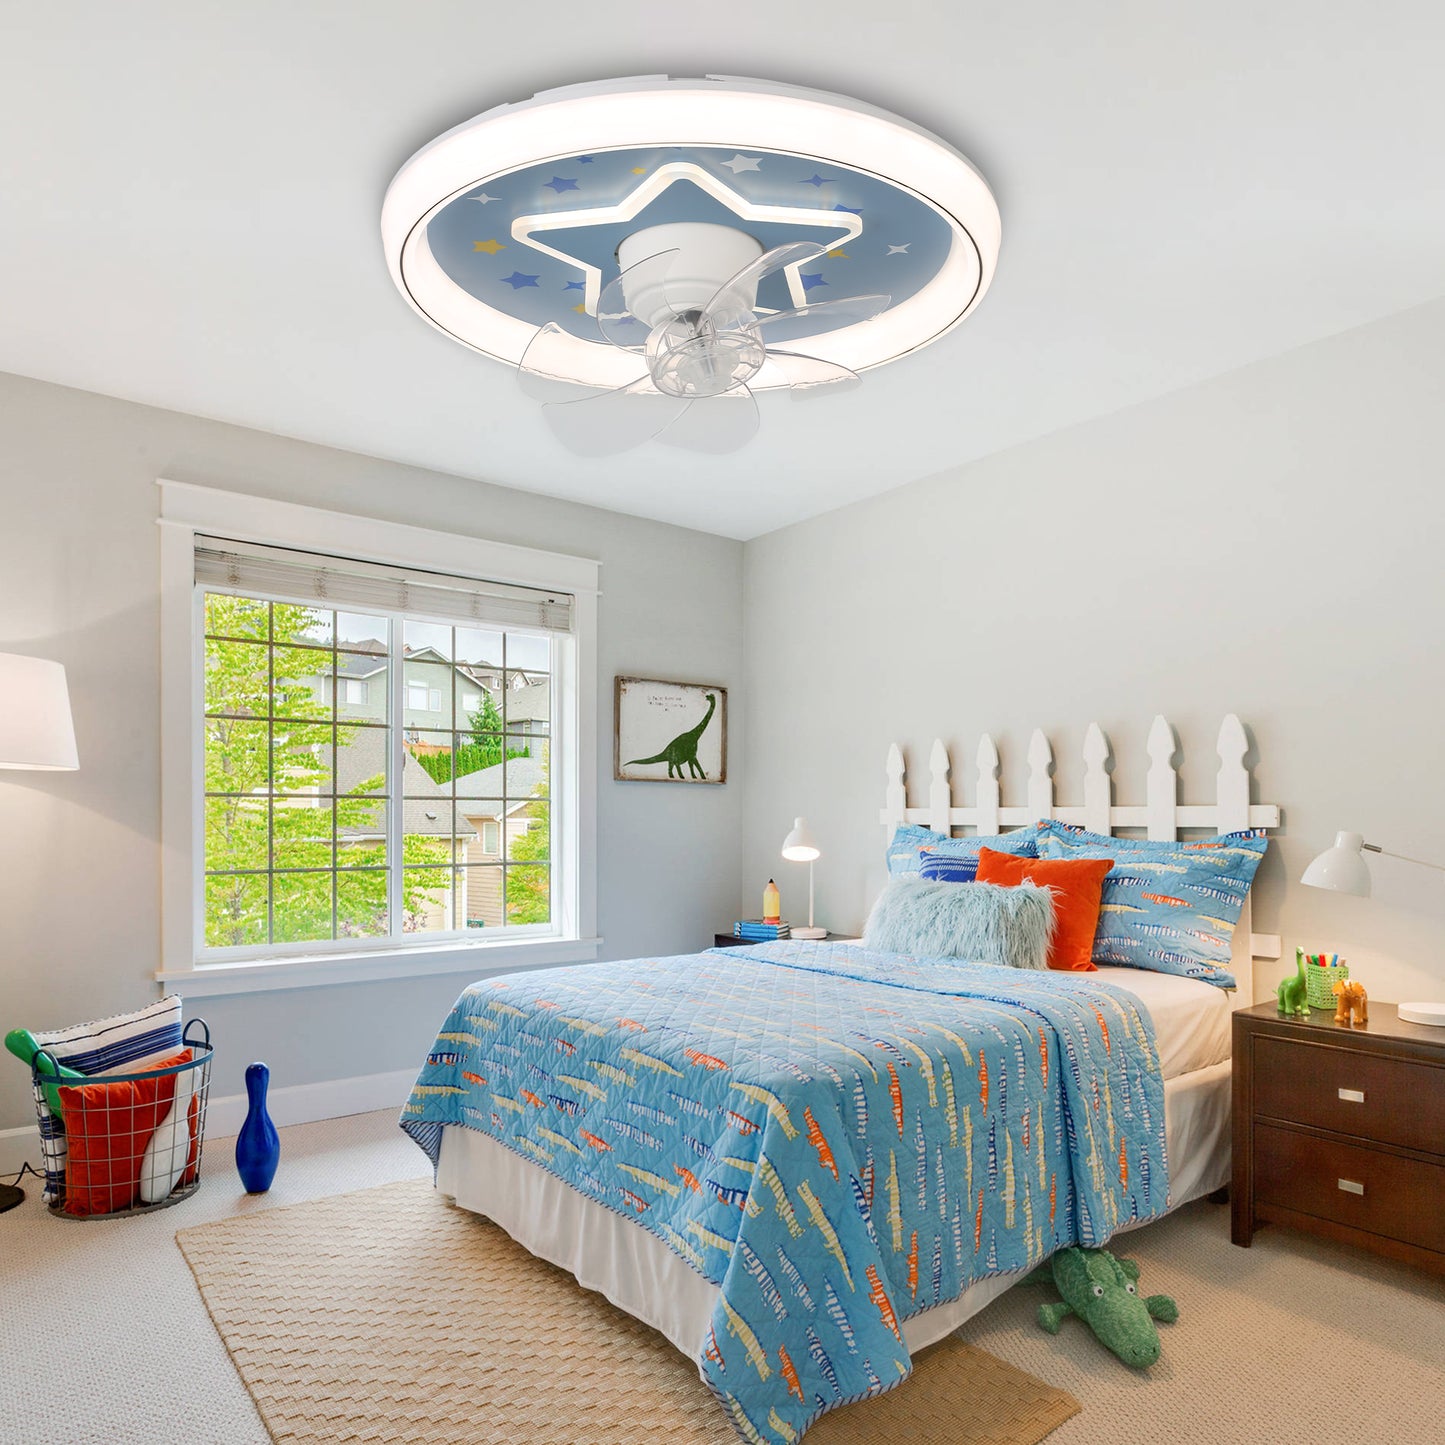 19 in. Cartoon Design Dimmable Ceiling Fan with Integrated LED and Remote for Kids Room